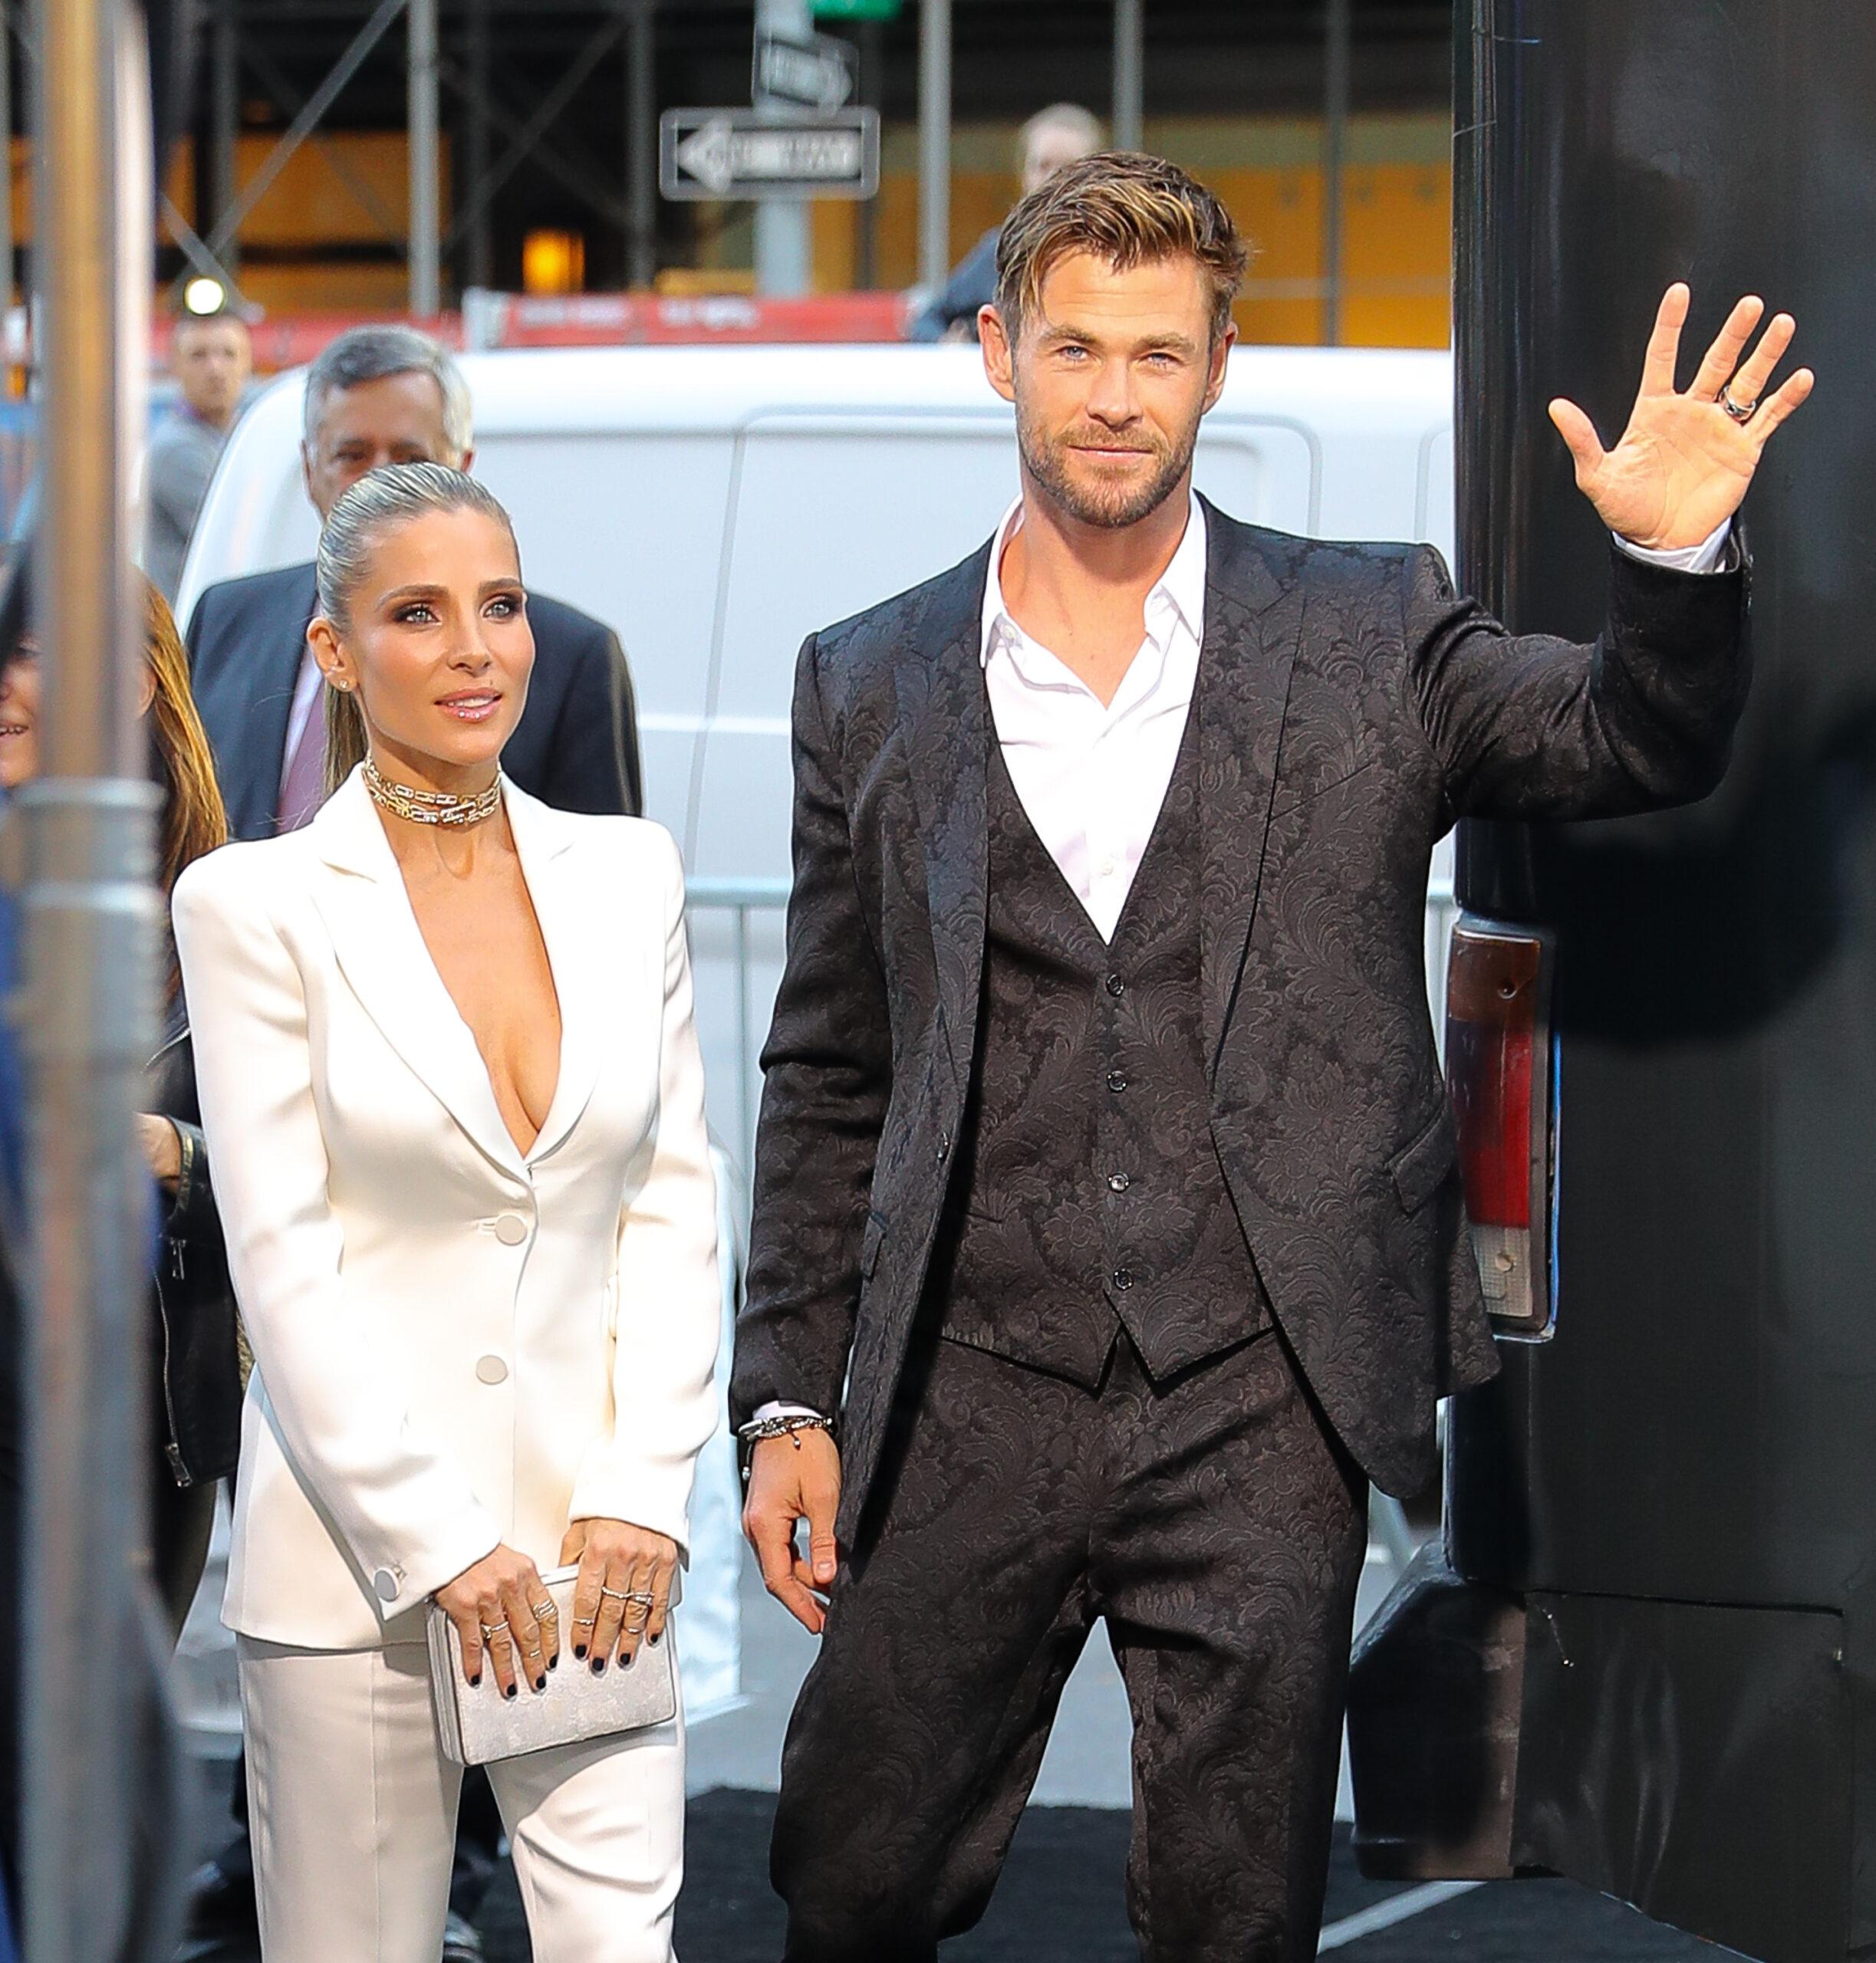 Chris Hemsworth and Elsa Pataky at the MIB premiere in NYC on Jun 11, 2019